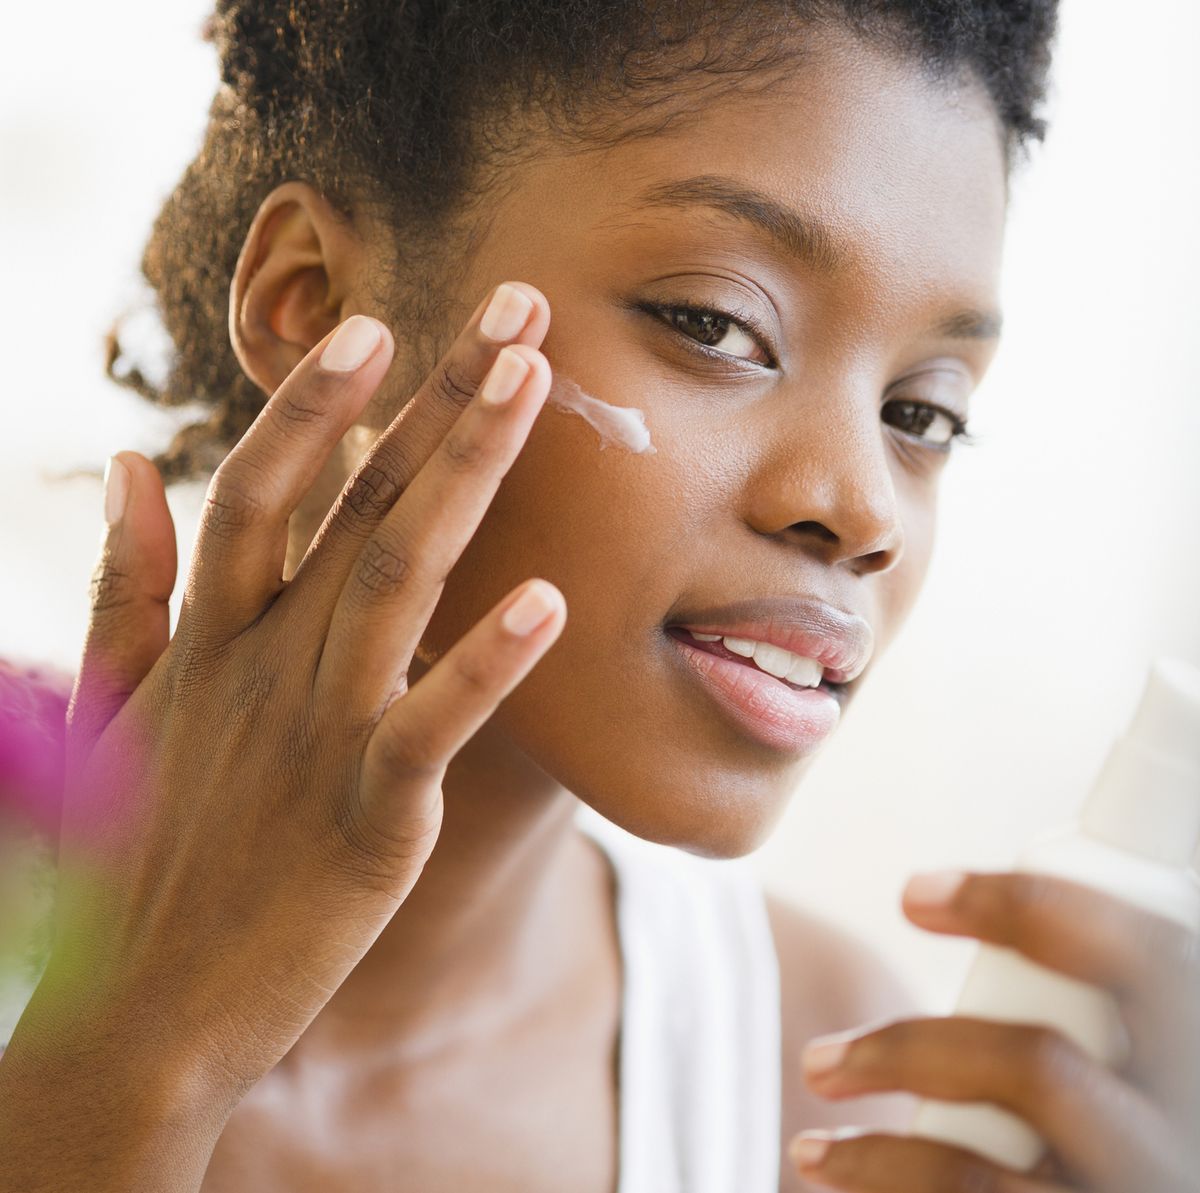 New 4-in-1 Face Cream from Relevant, a New Black-Founded Skincare Brand